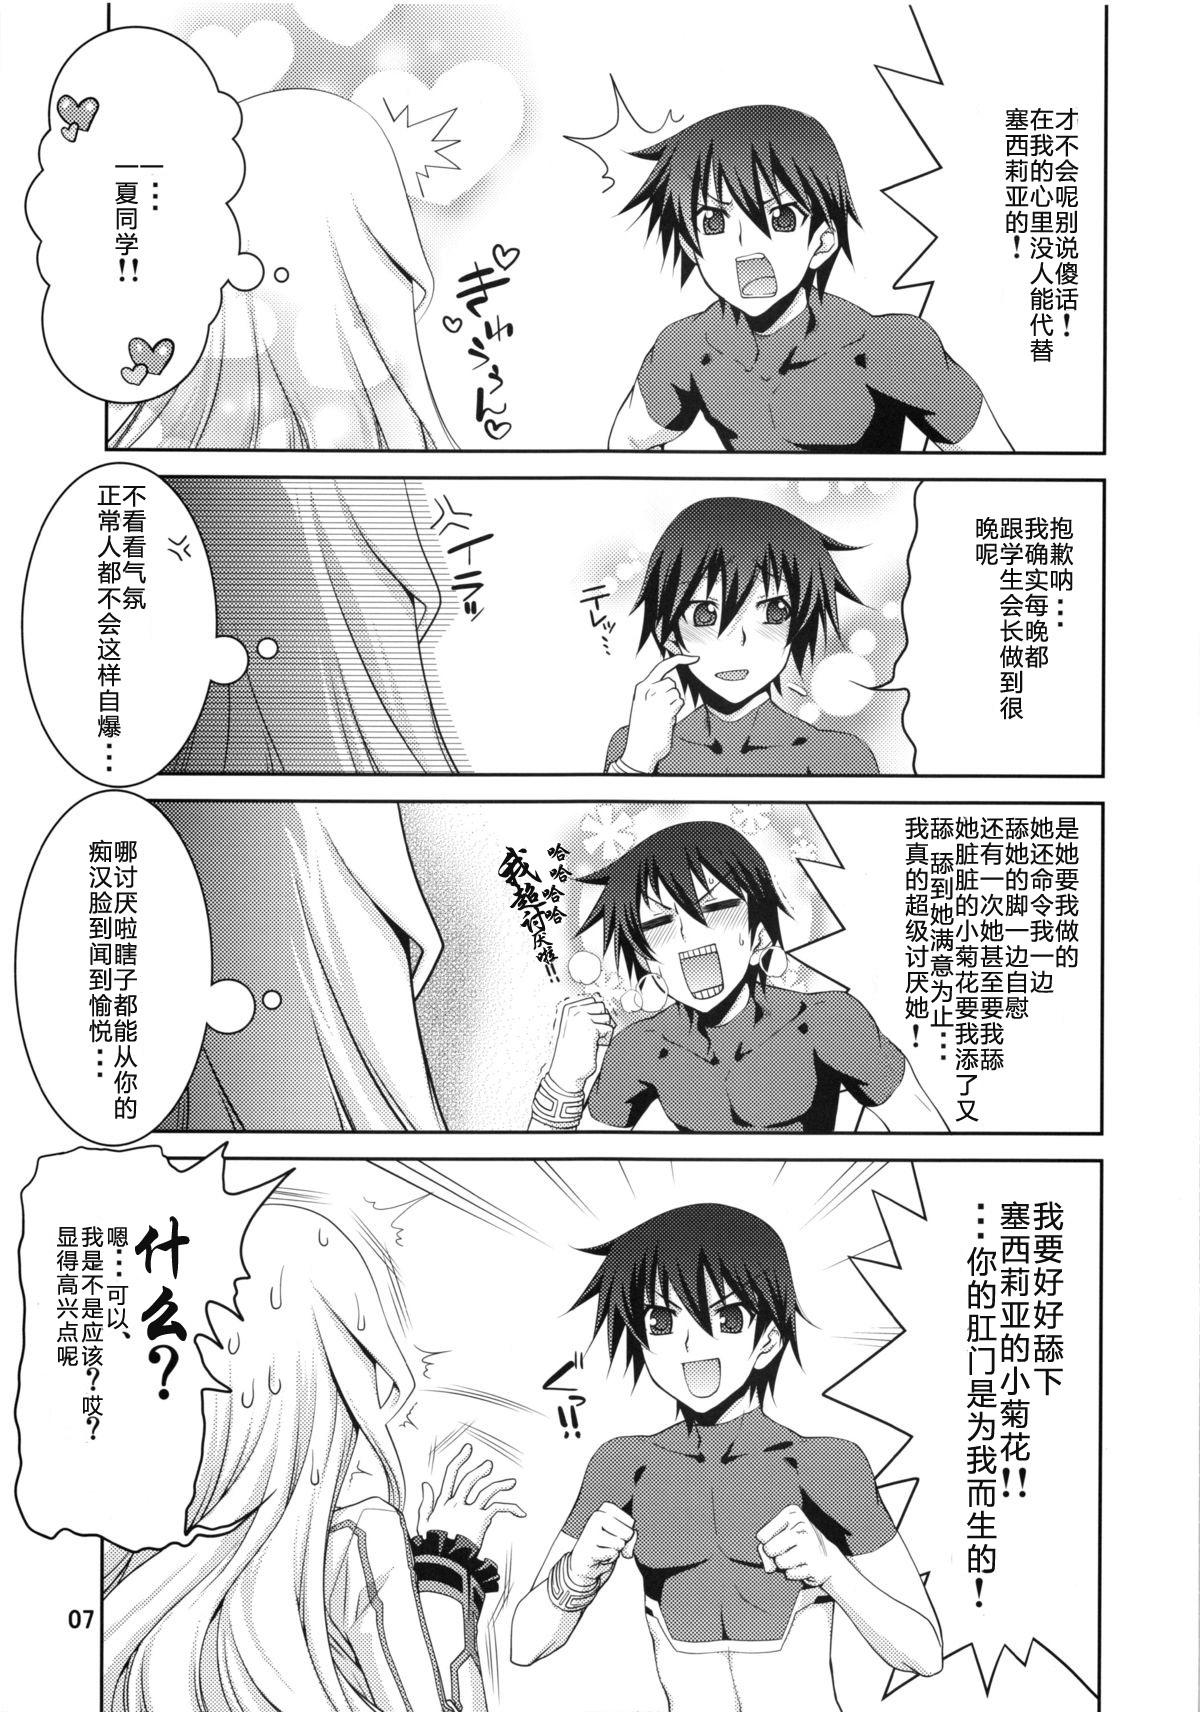 Bwc IS 2 - Infinite stratos Rough Sex - Page 6